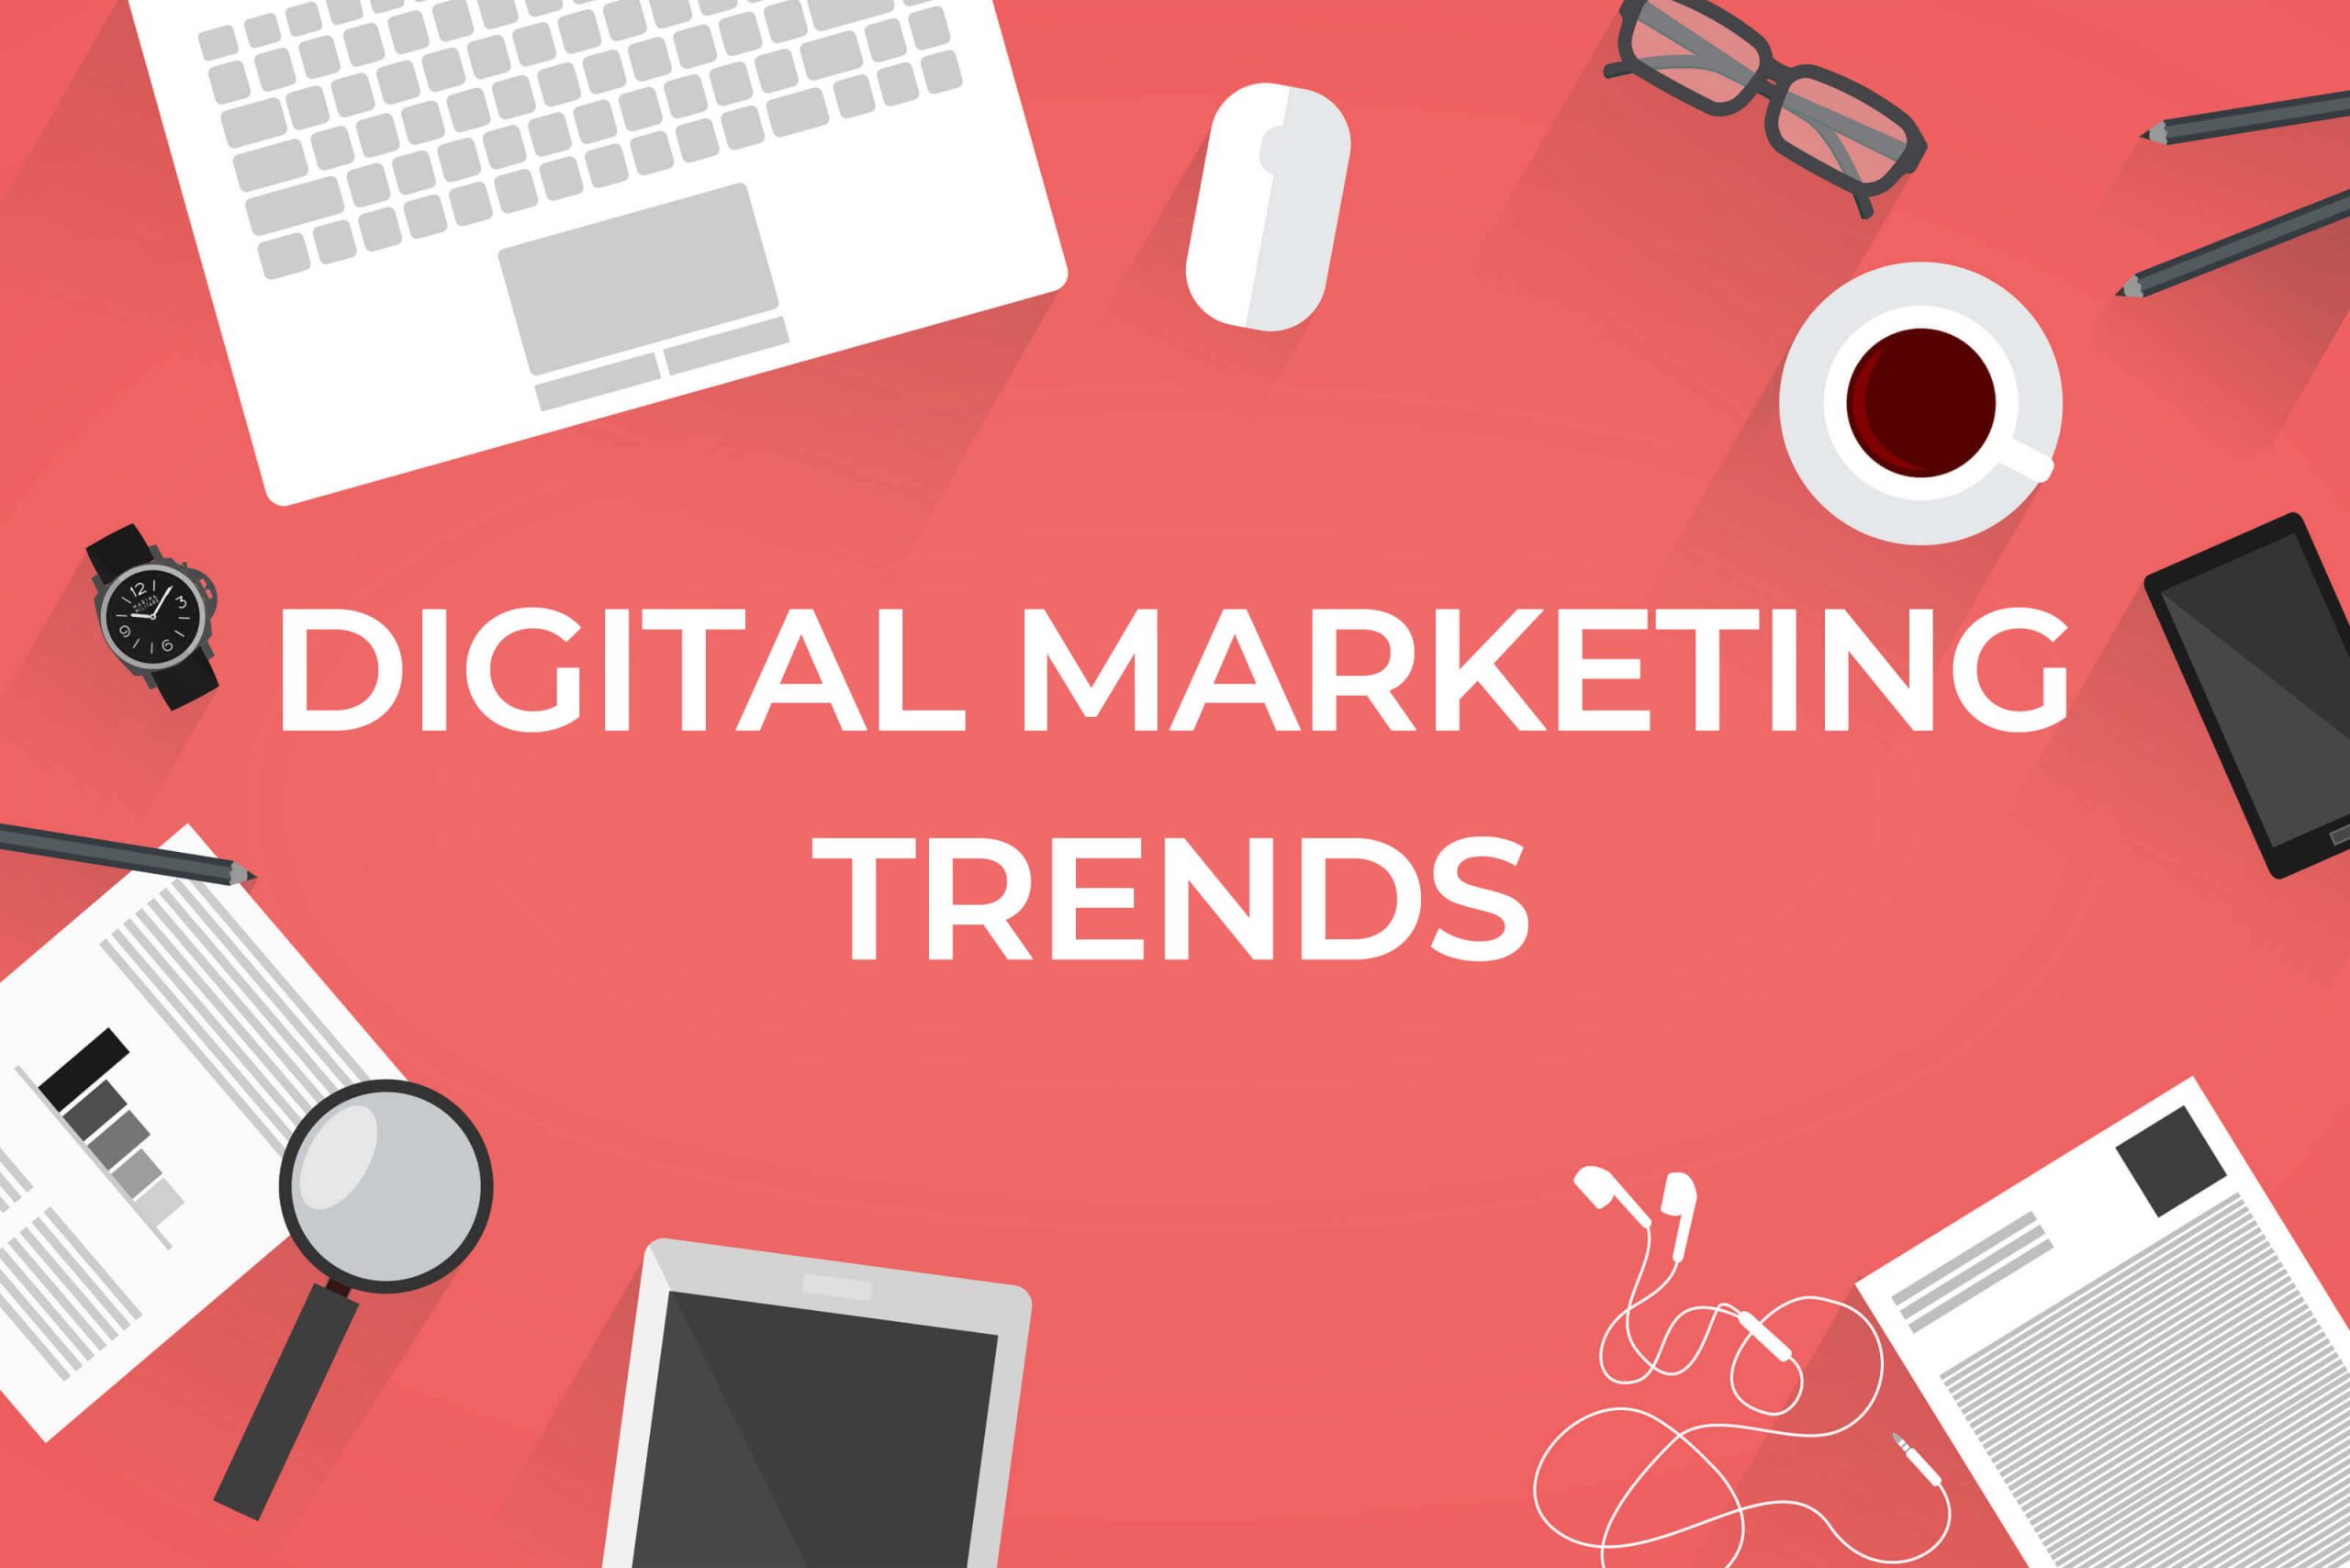 Digital Marketing in 2021 – Trends that You Should Consider